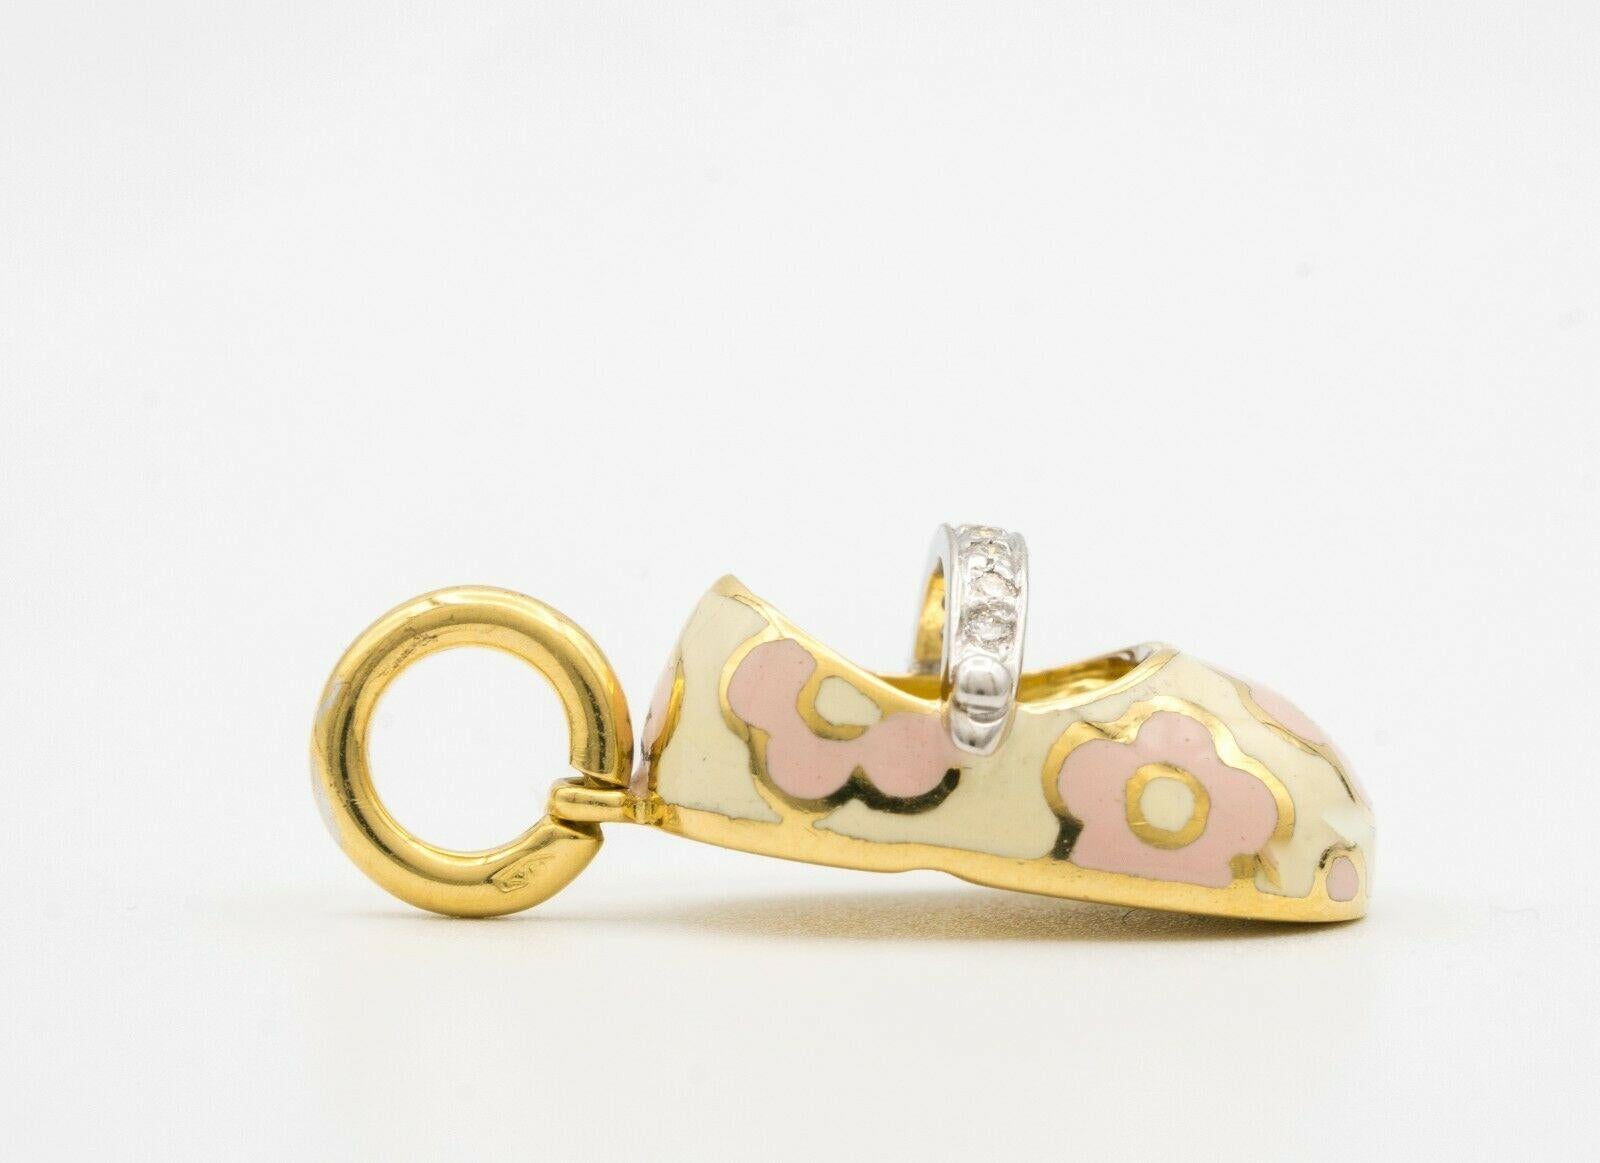 Original Aaron Basha 18K yellow gold, enamel and diamond pink clover floral design shoe charm with small round diamonds featured on strap.

Stamped with signature, AB initials and 750 .
Original Retail: $2600
Chain and original packaging is not